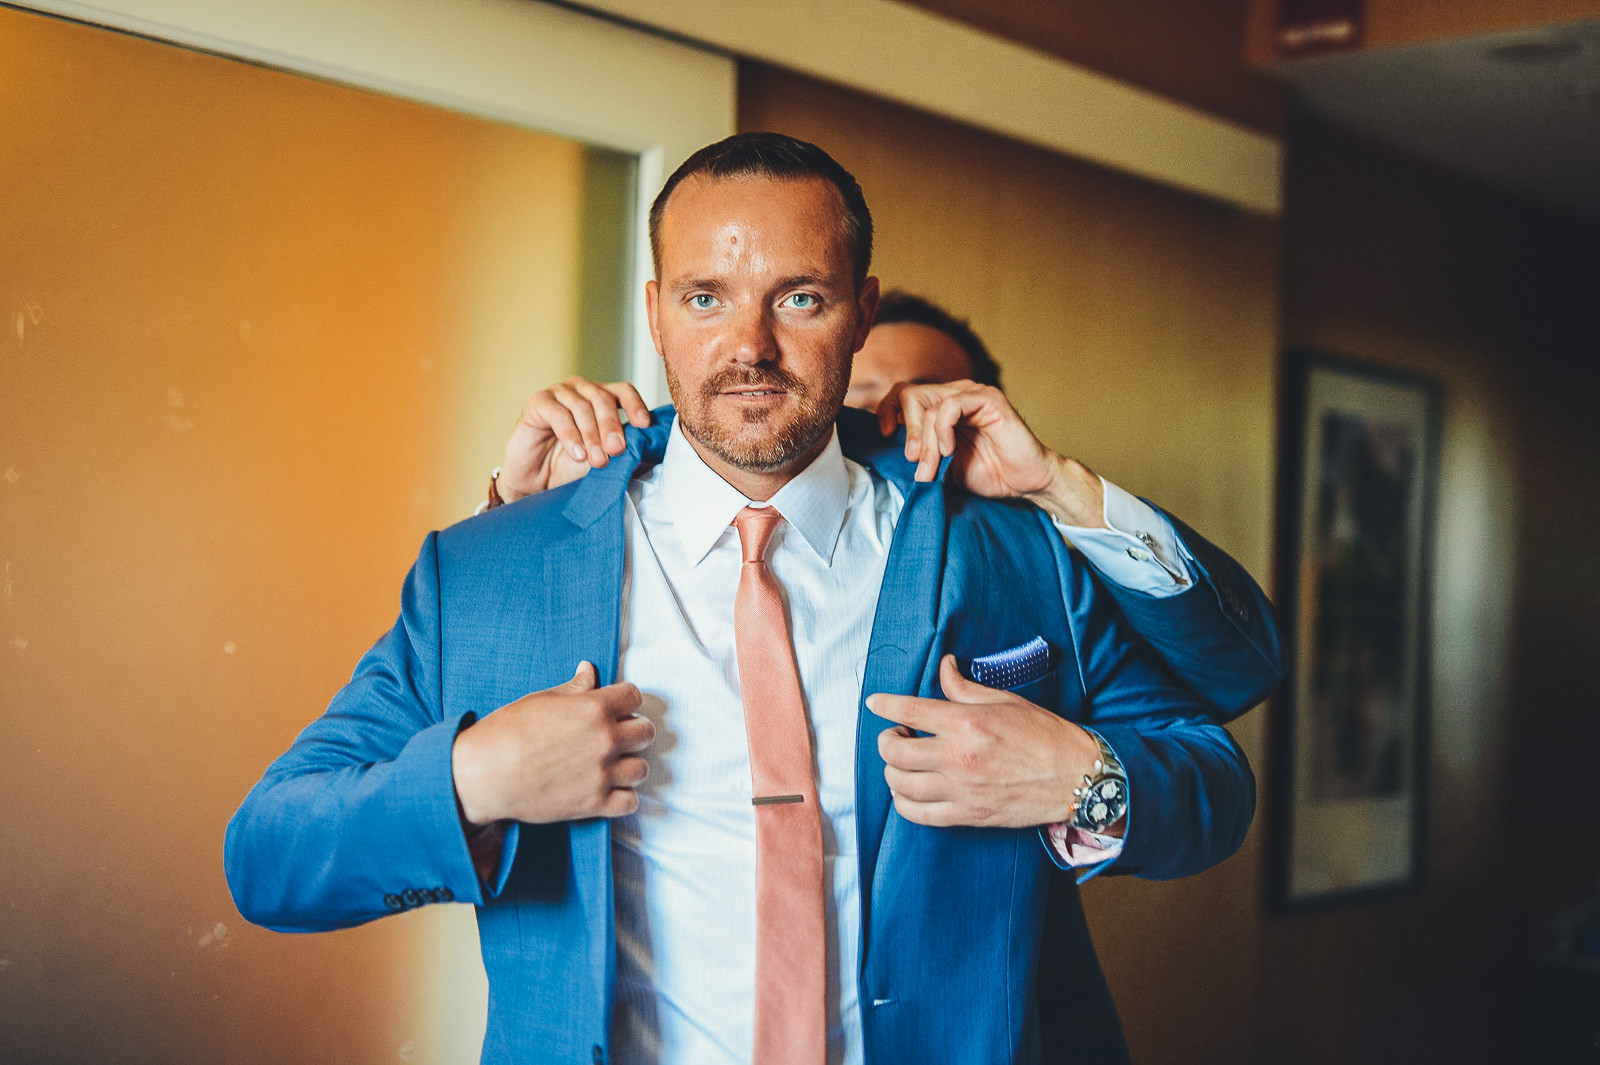 12 groom putting on suit in chicago - Natalie + Alan // Chicago Wedding Photographer at Cafe Brauer